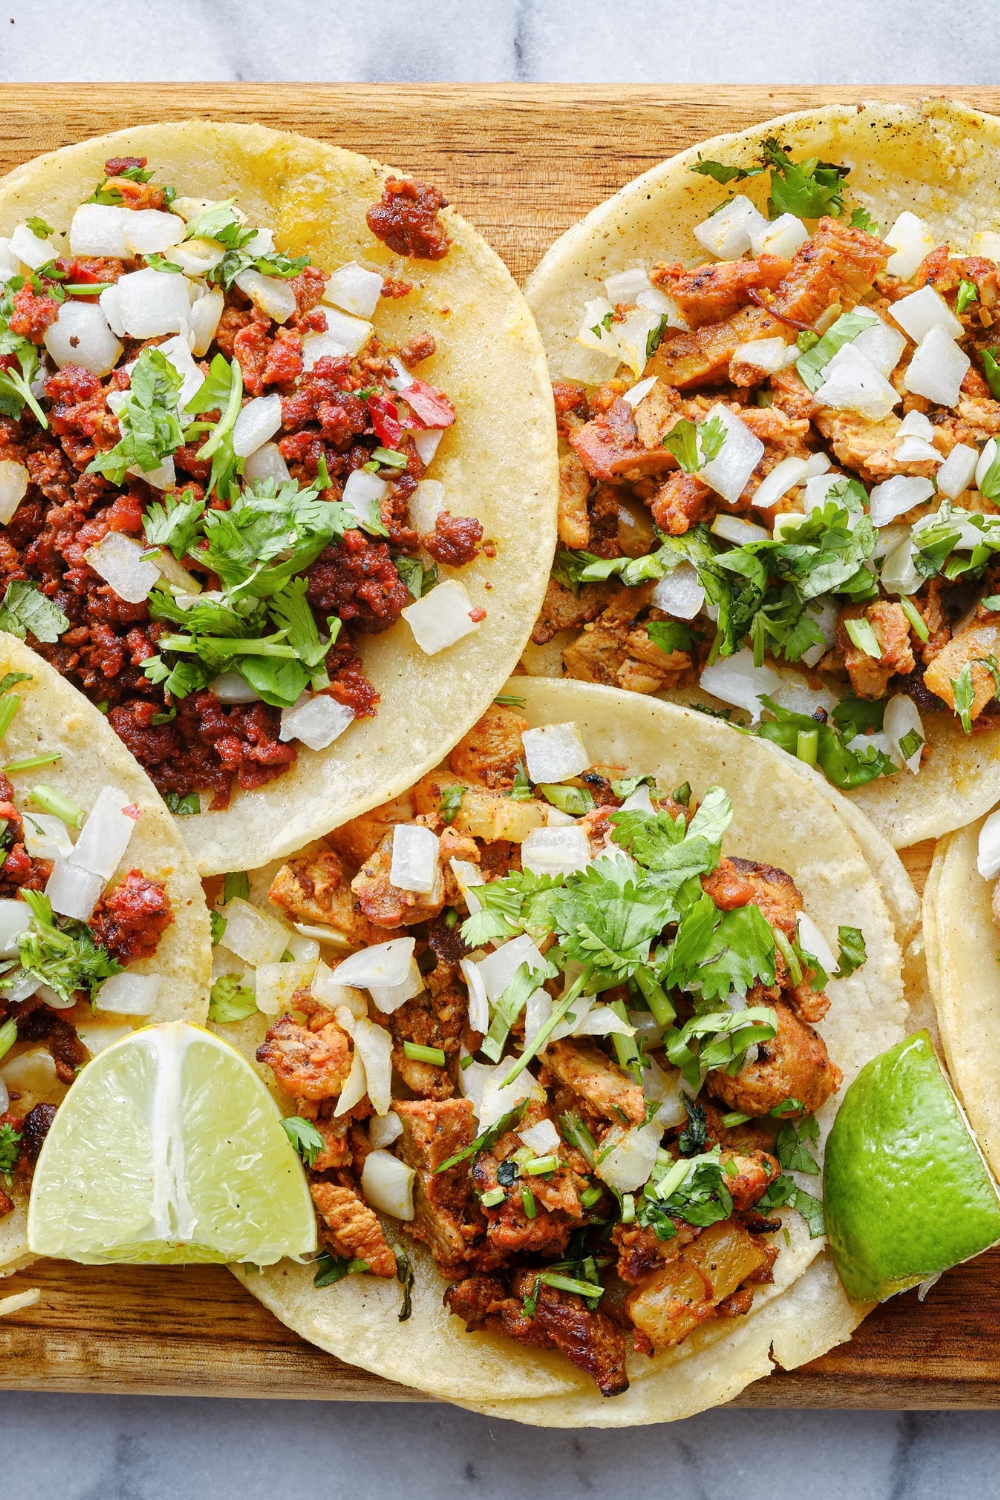 Different Types of Pork and Beef Tacos with Lime